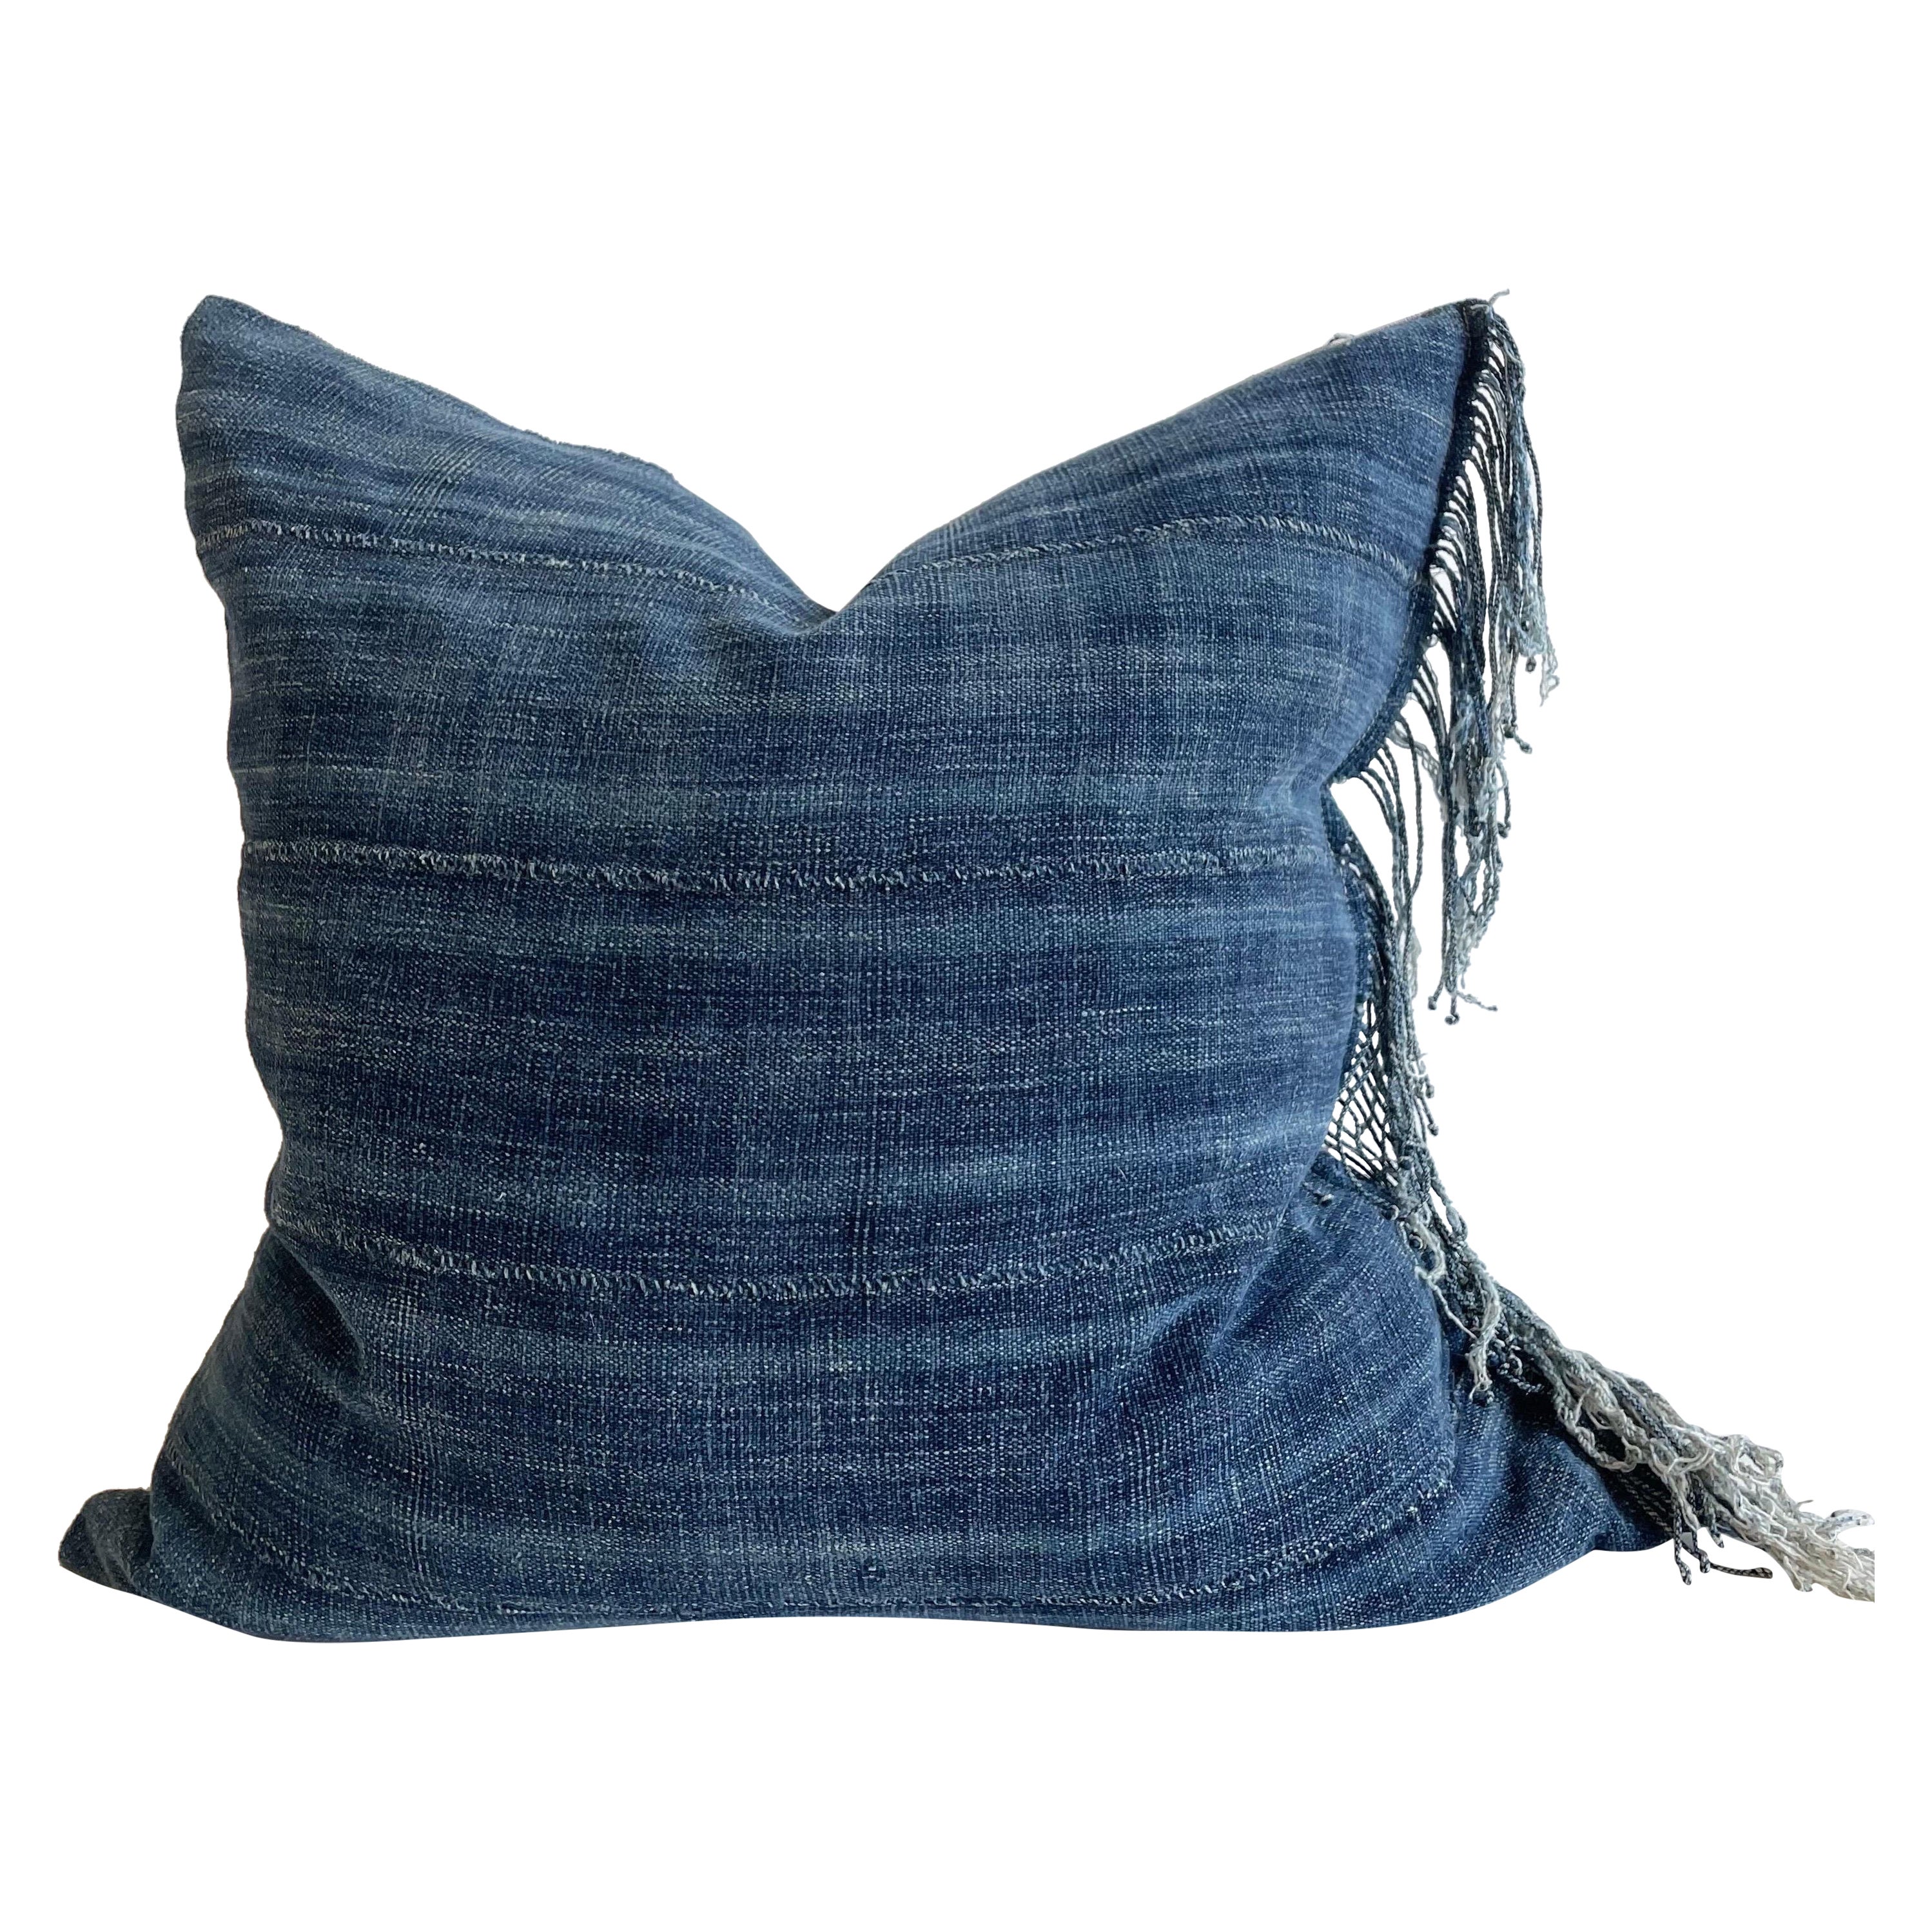 Antique Indigo Blue Stripe Pillow with Original Fringe and Down Insert Right